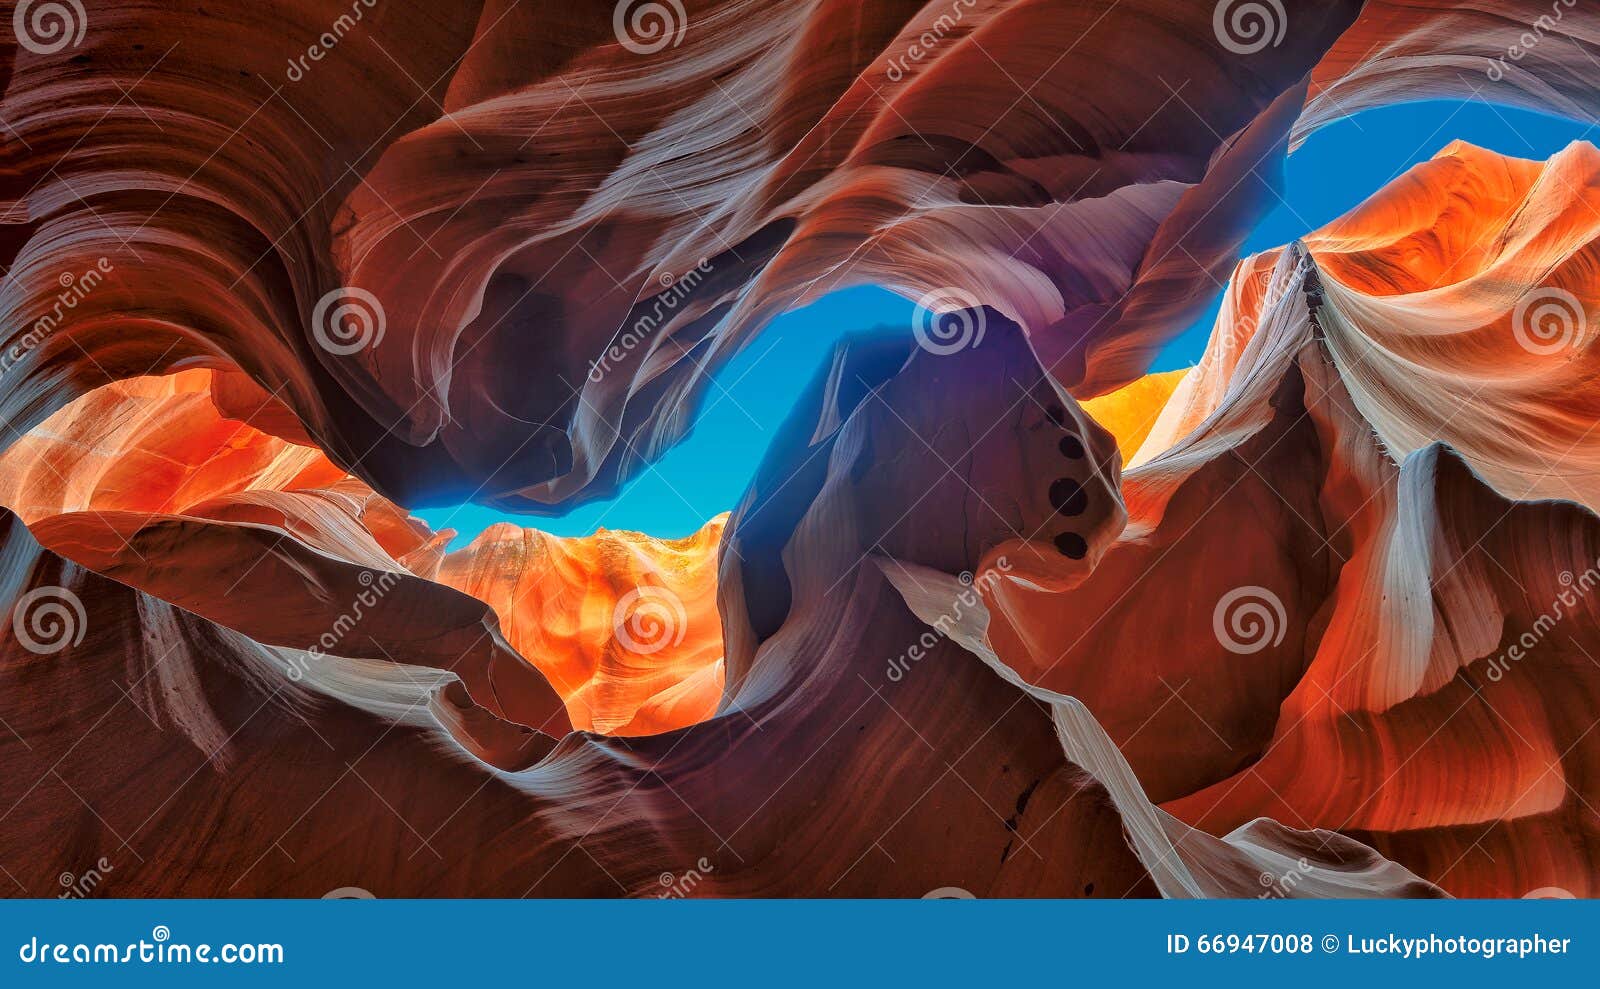 all the colors of the antelope canyon